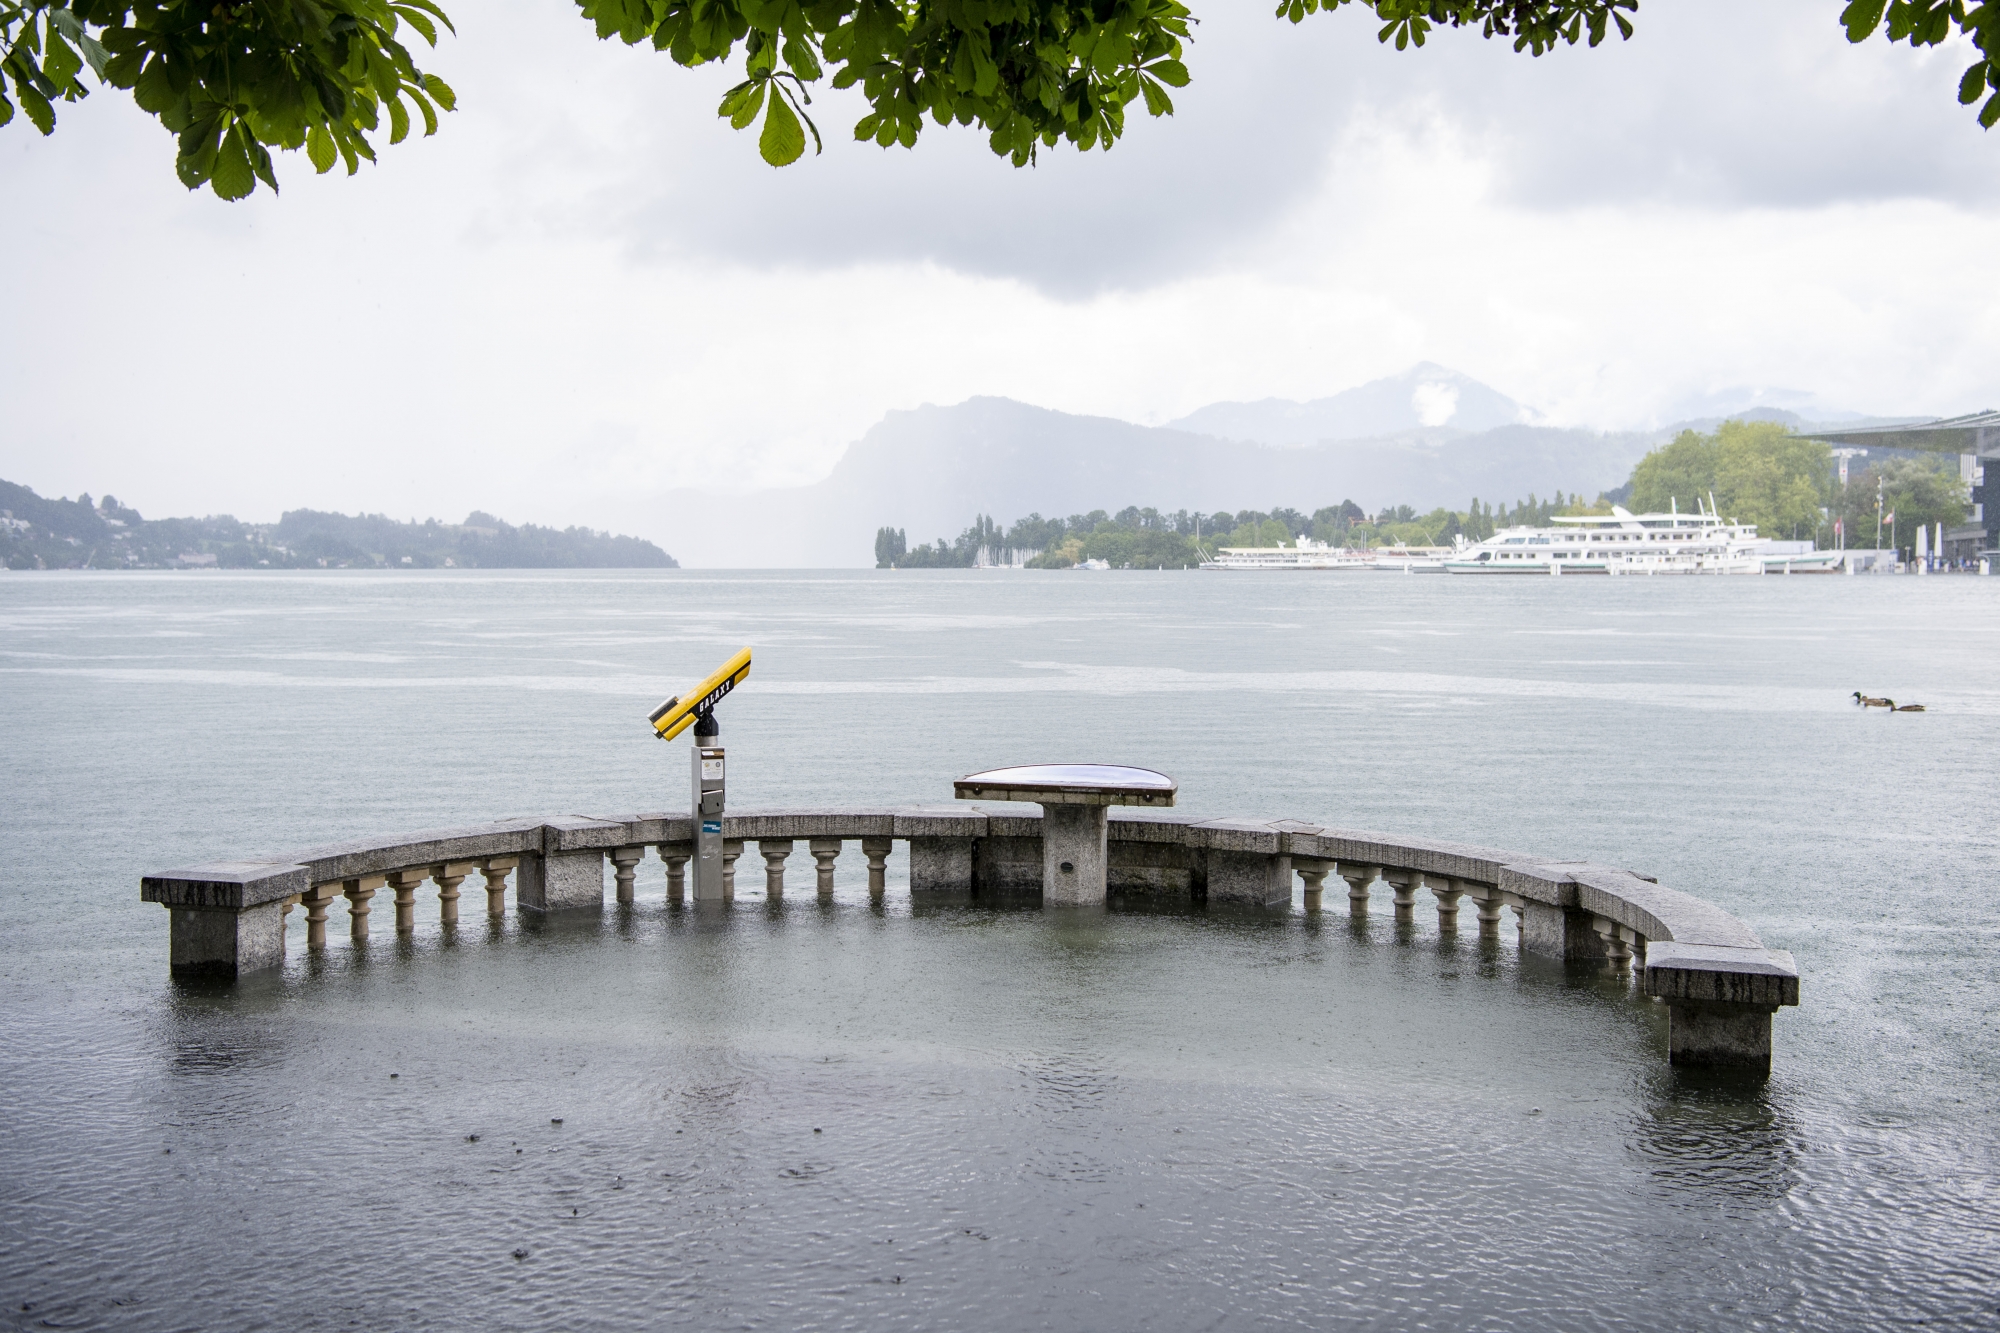 The first water overflows at Schweizerhofquai in Lucerne have occurred, Friday, July 16, 2021, in Lucerne. The water level of Lake Vierwaldstaettersee has risen ominously high and flooding must be expected in the next few days. (KEYSTONE/Urs Flueeler)